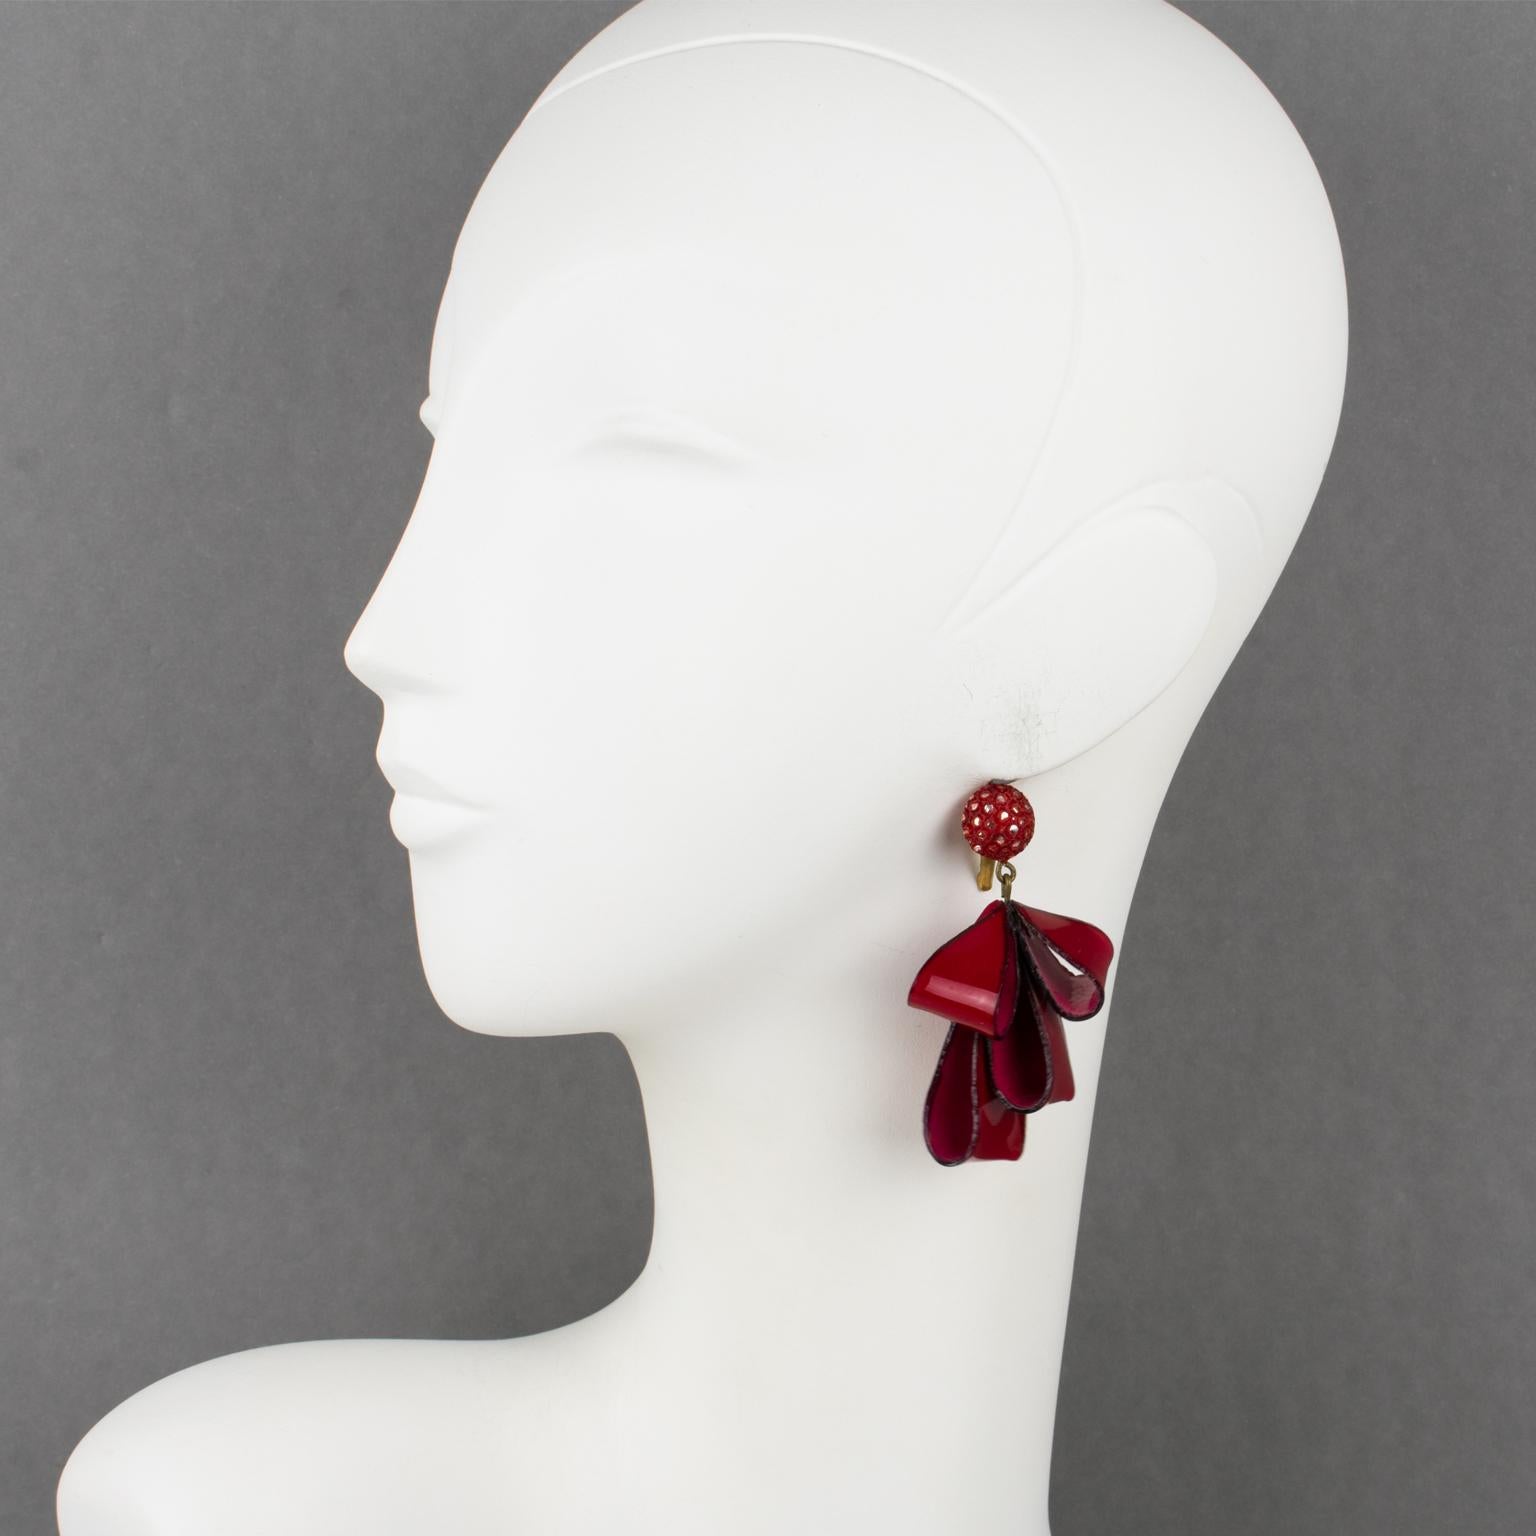 Adorable dimensional dangling pierced earrings by Cilea Paris. Hand-made artisanal resin earrings featuring dimensional ribbons with textured patterns built together to form a powerful statement piece. Very nice vivid ruby red and silver colors.